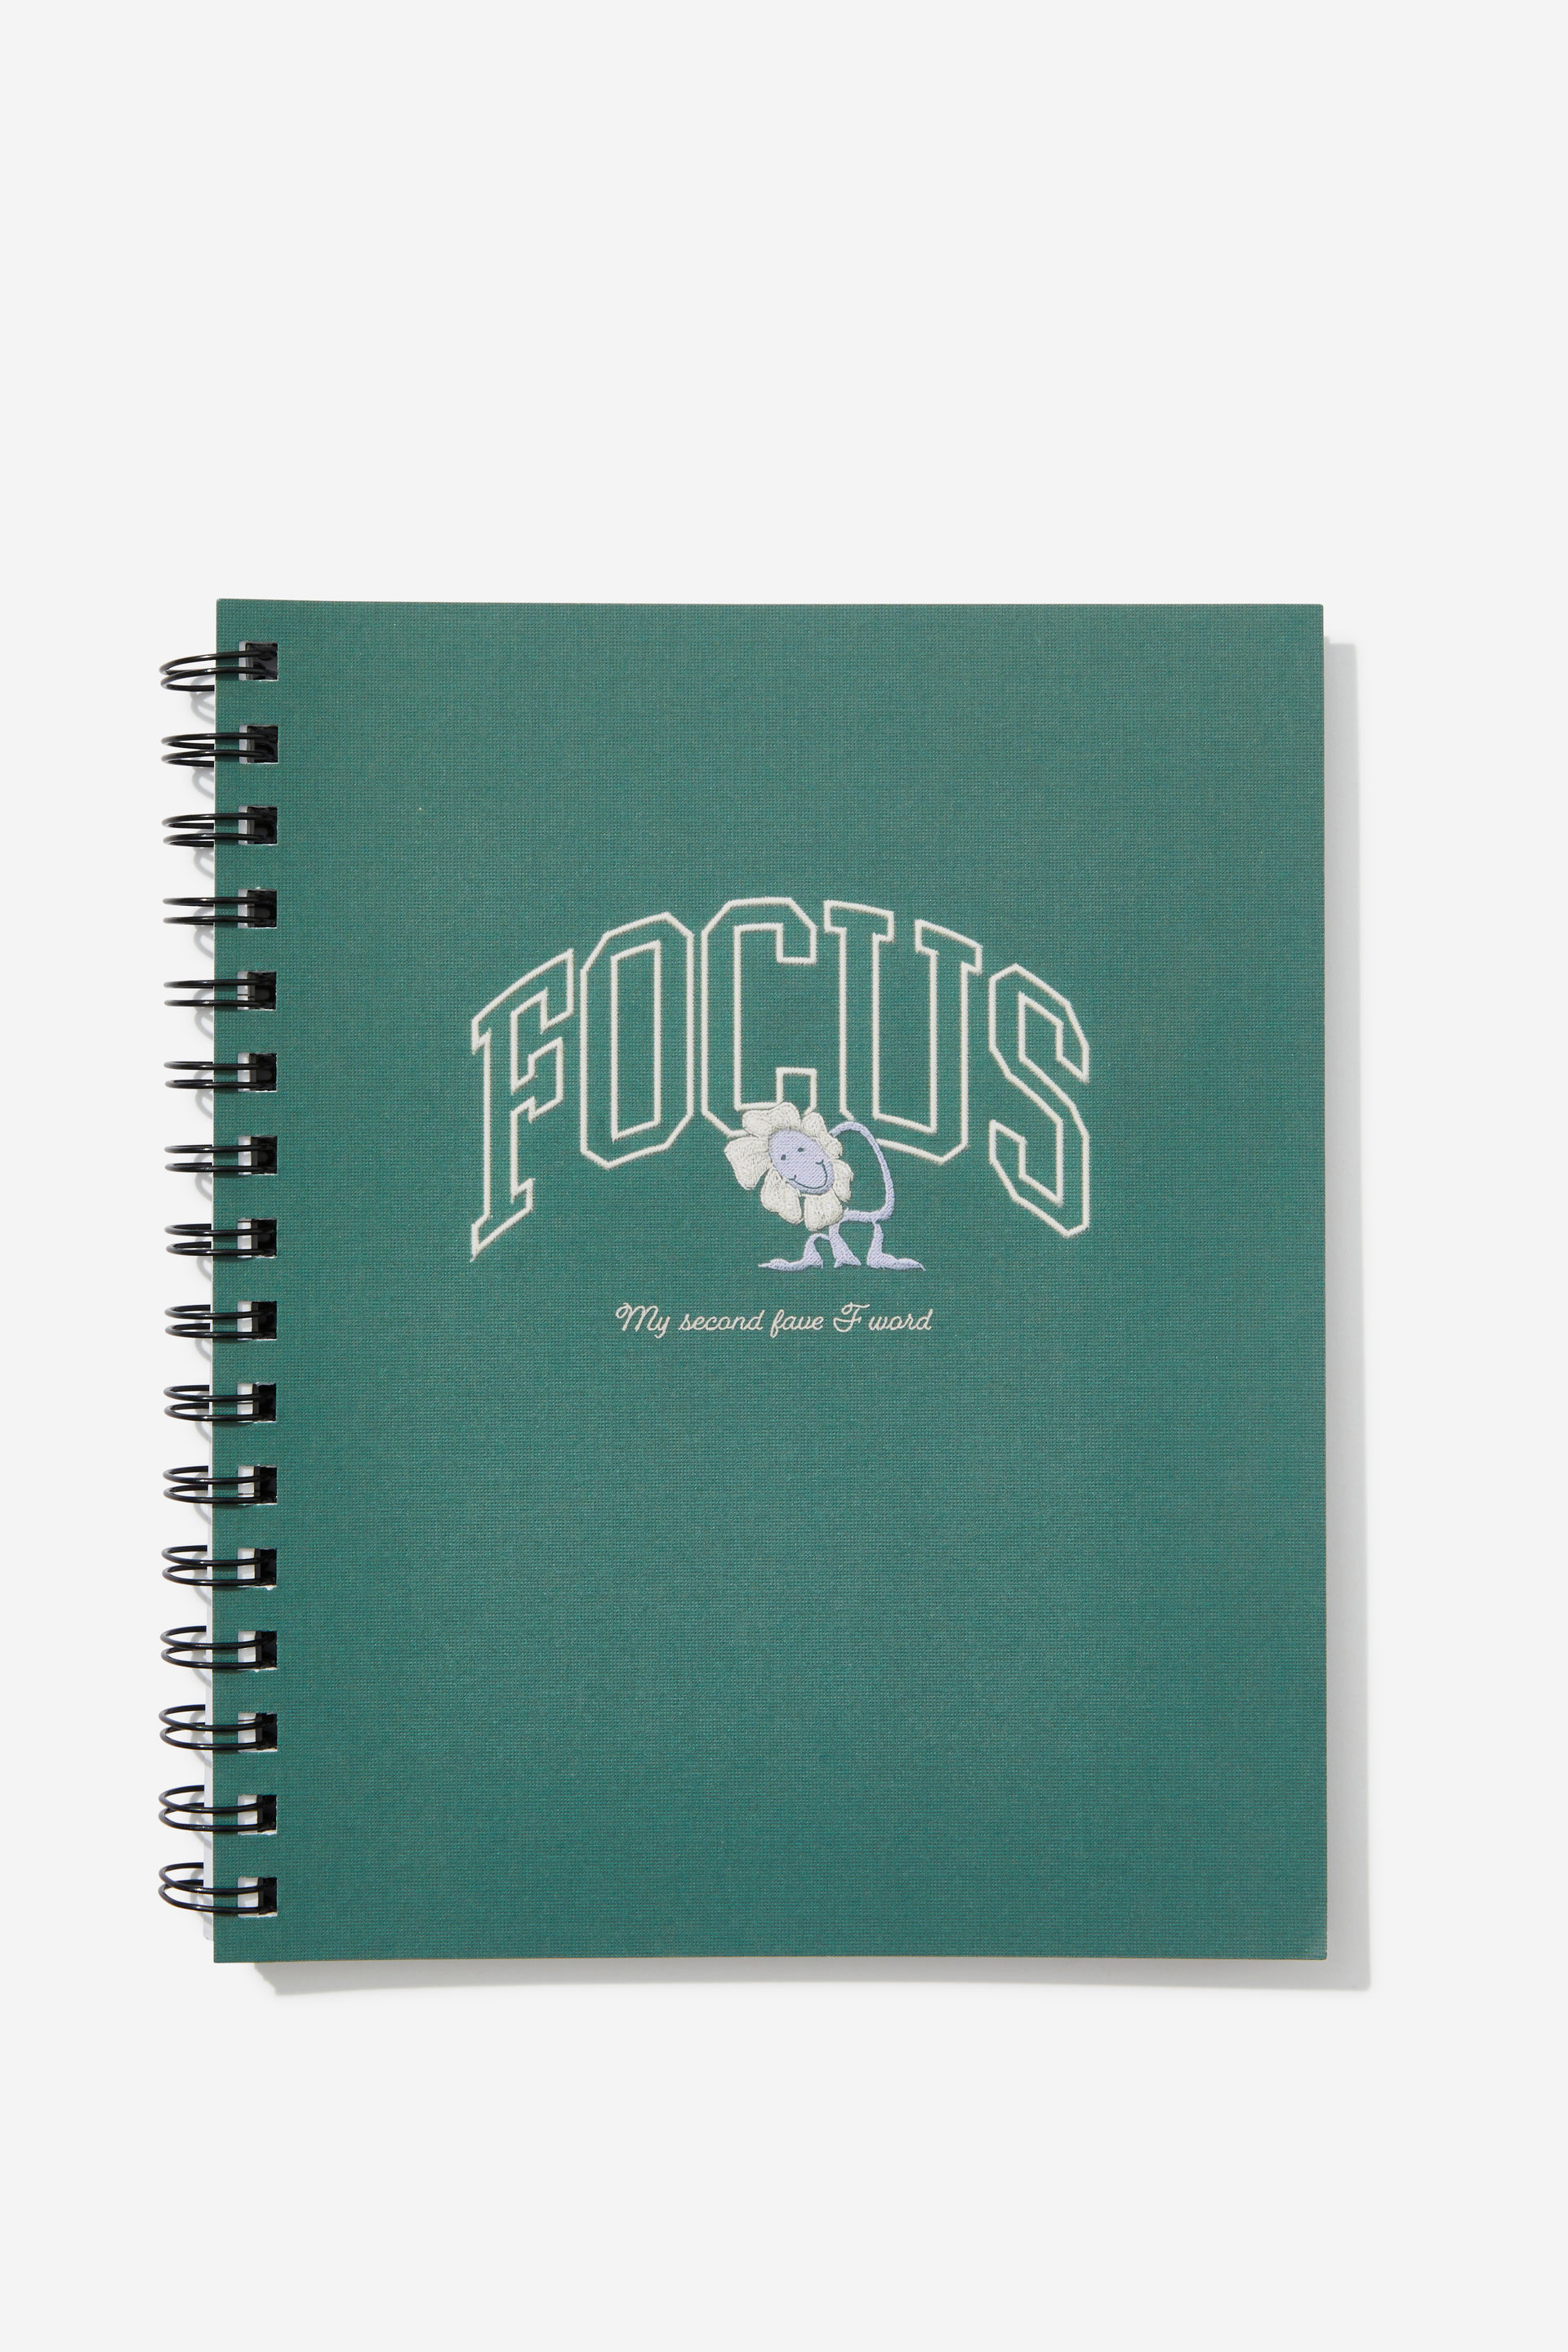 Typo - A5 Campus Notebook Recycled - Focus f word